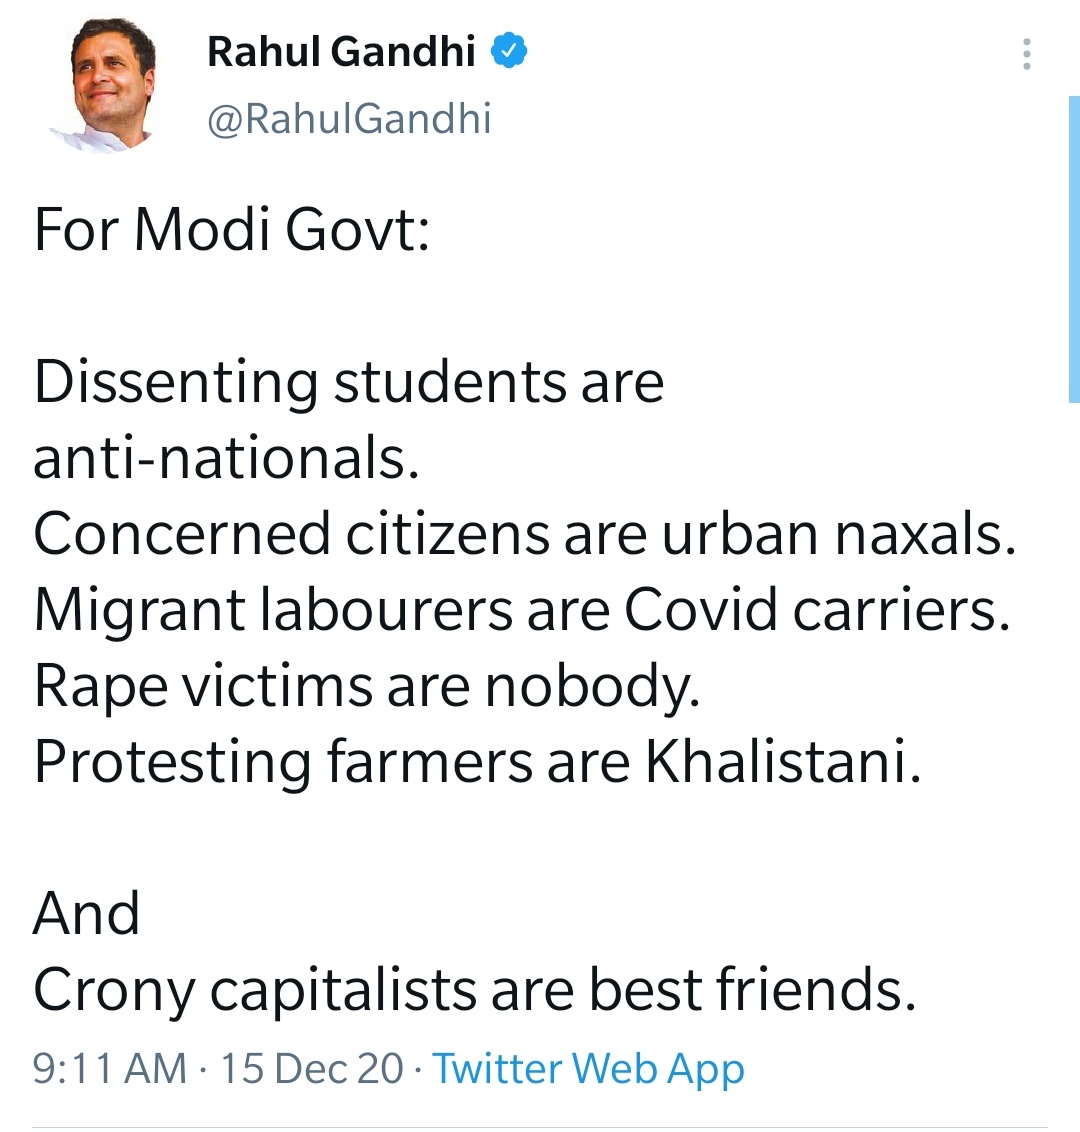 Had  @RahulGandhi been PM, we wouldn't see such name-calling when there's an issue, instead we would see him fixing the issues at hand.